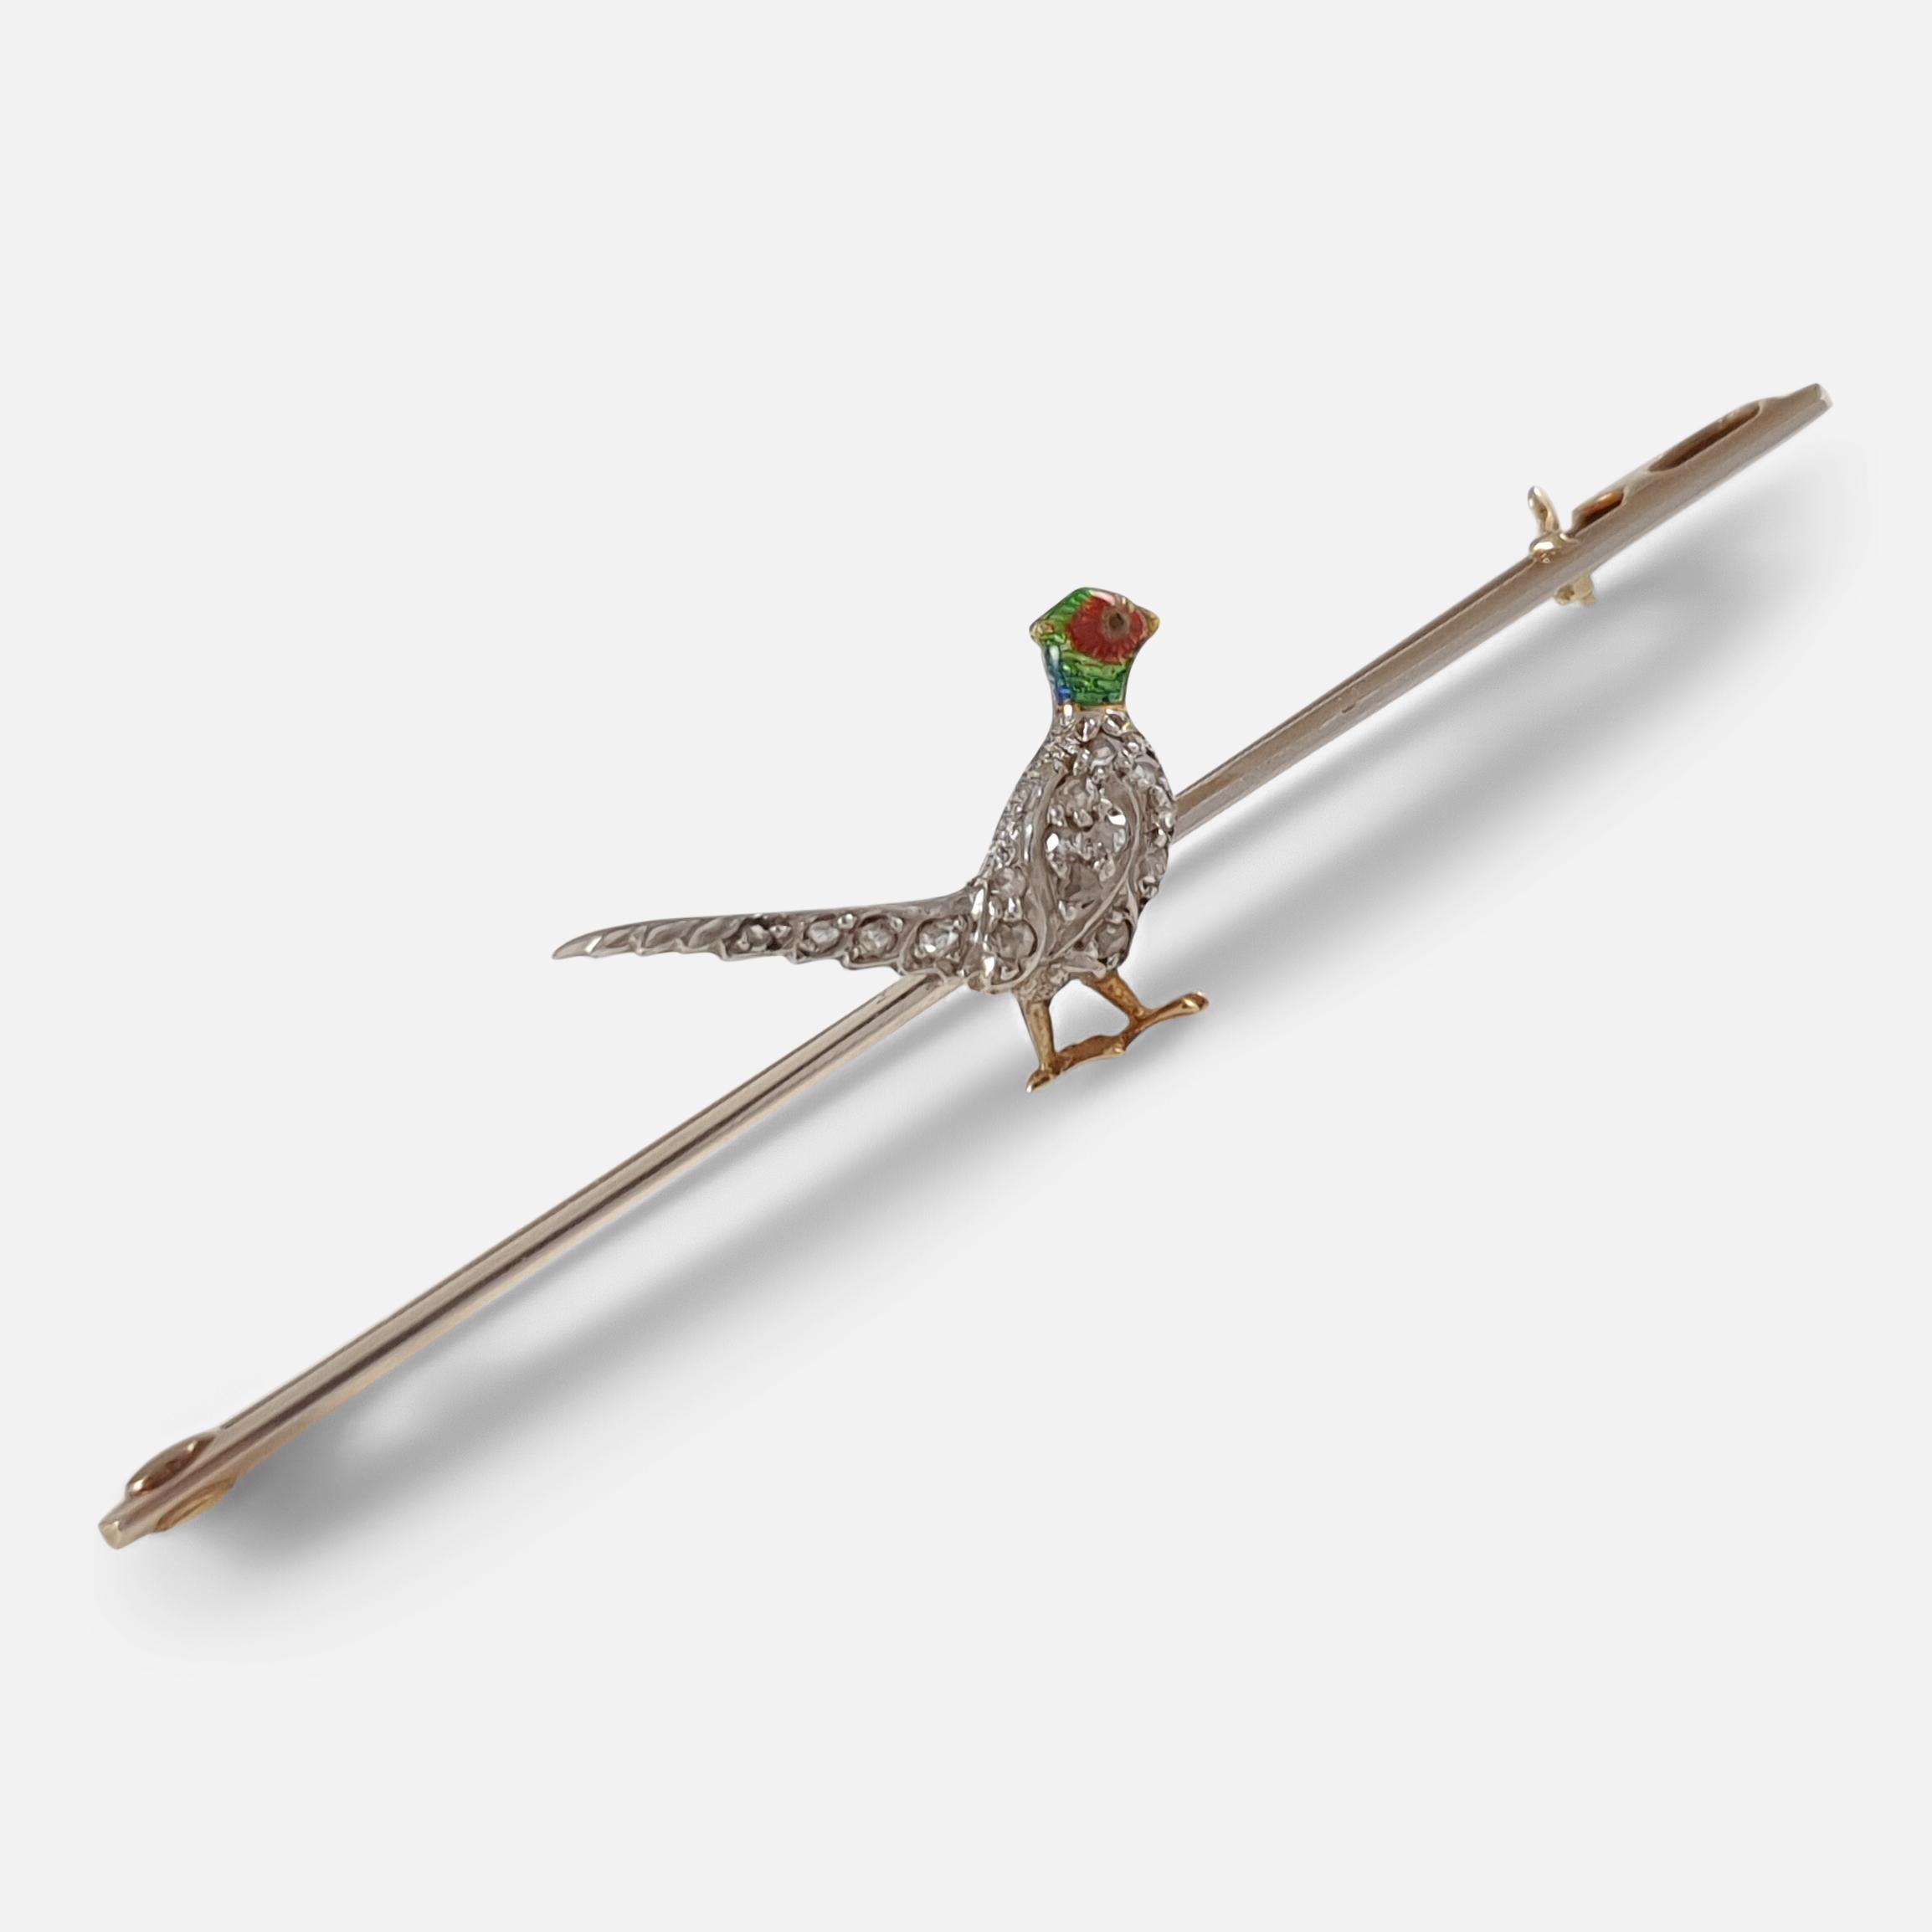 An Edwardian 15 carat yellow gold, platinum fronted, diamond, and enamel pheasant pin brooch. The brooch depicts a pheasant decorated with enameling to its head, and diamonds to its body. 

The brooch is stamped ‘15CT PLATm’ to denote 15 karat